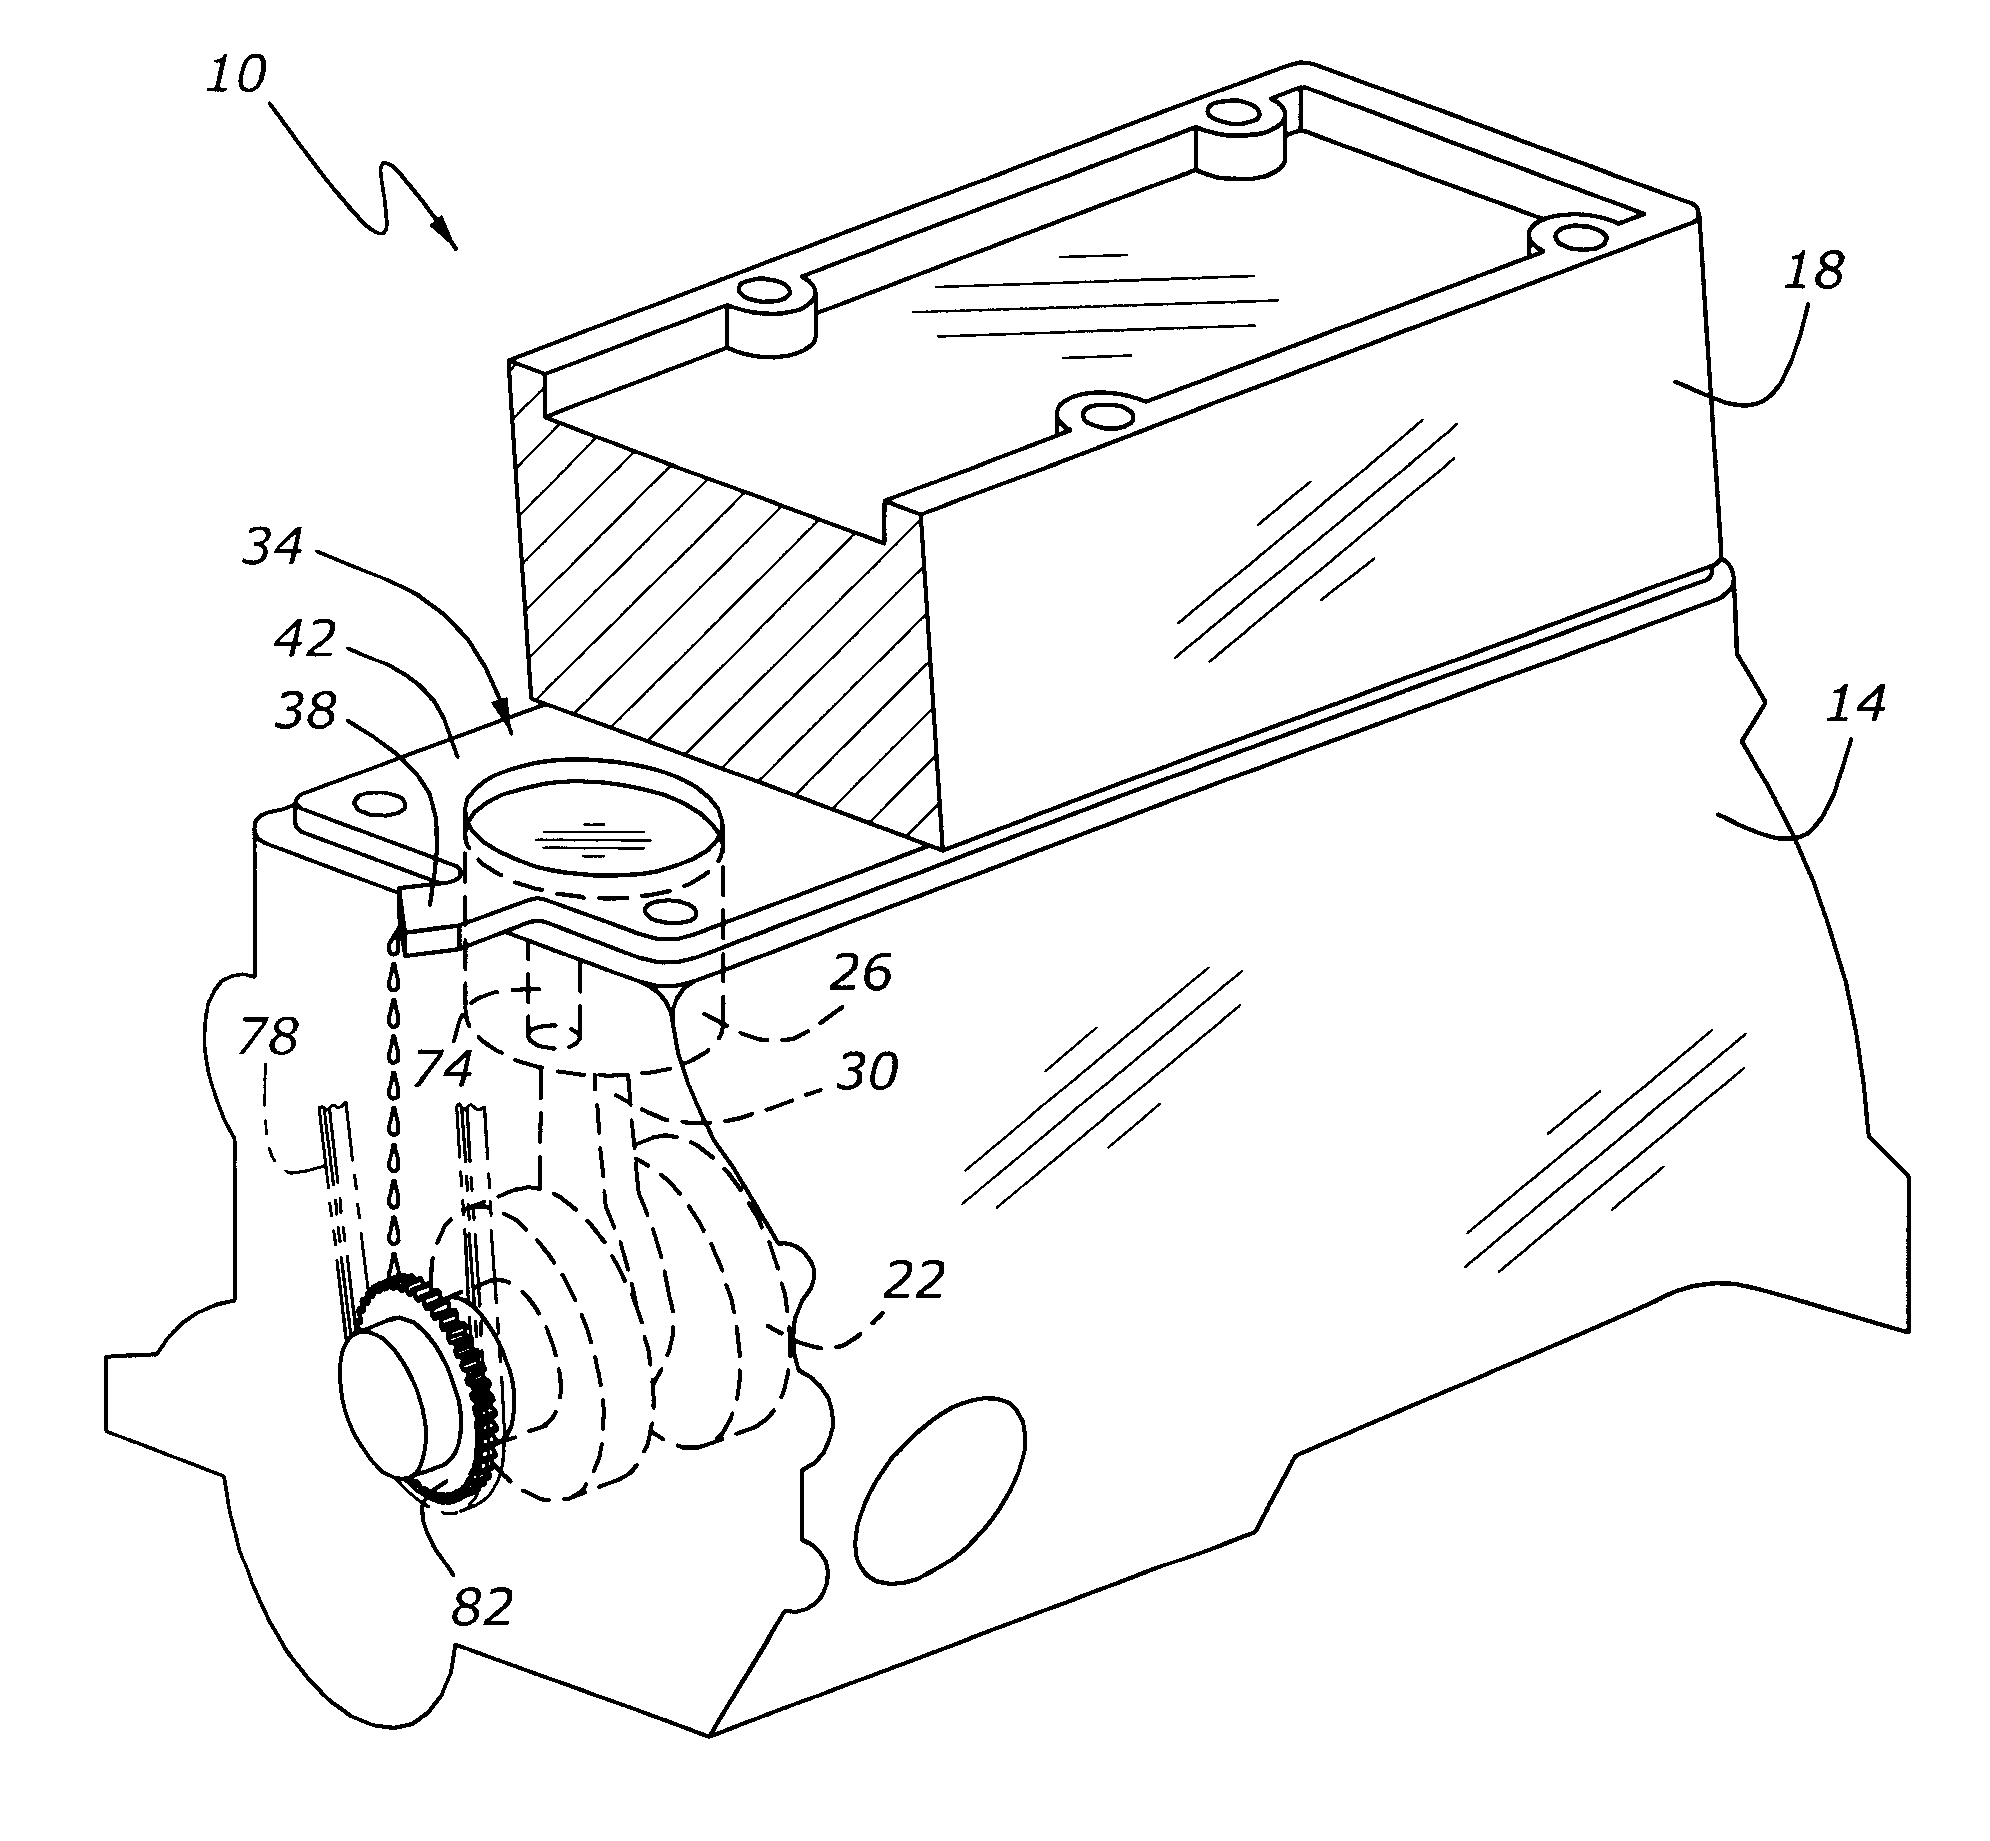 Lubrication and sealing system for internal combustion engine